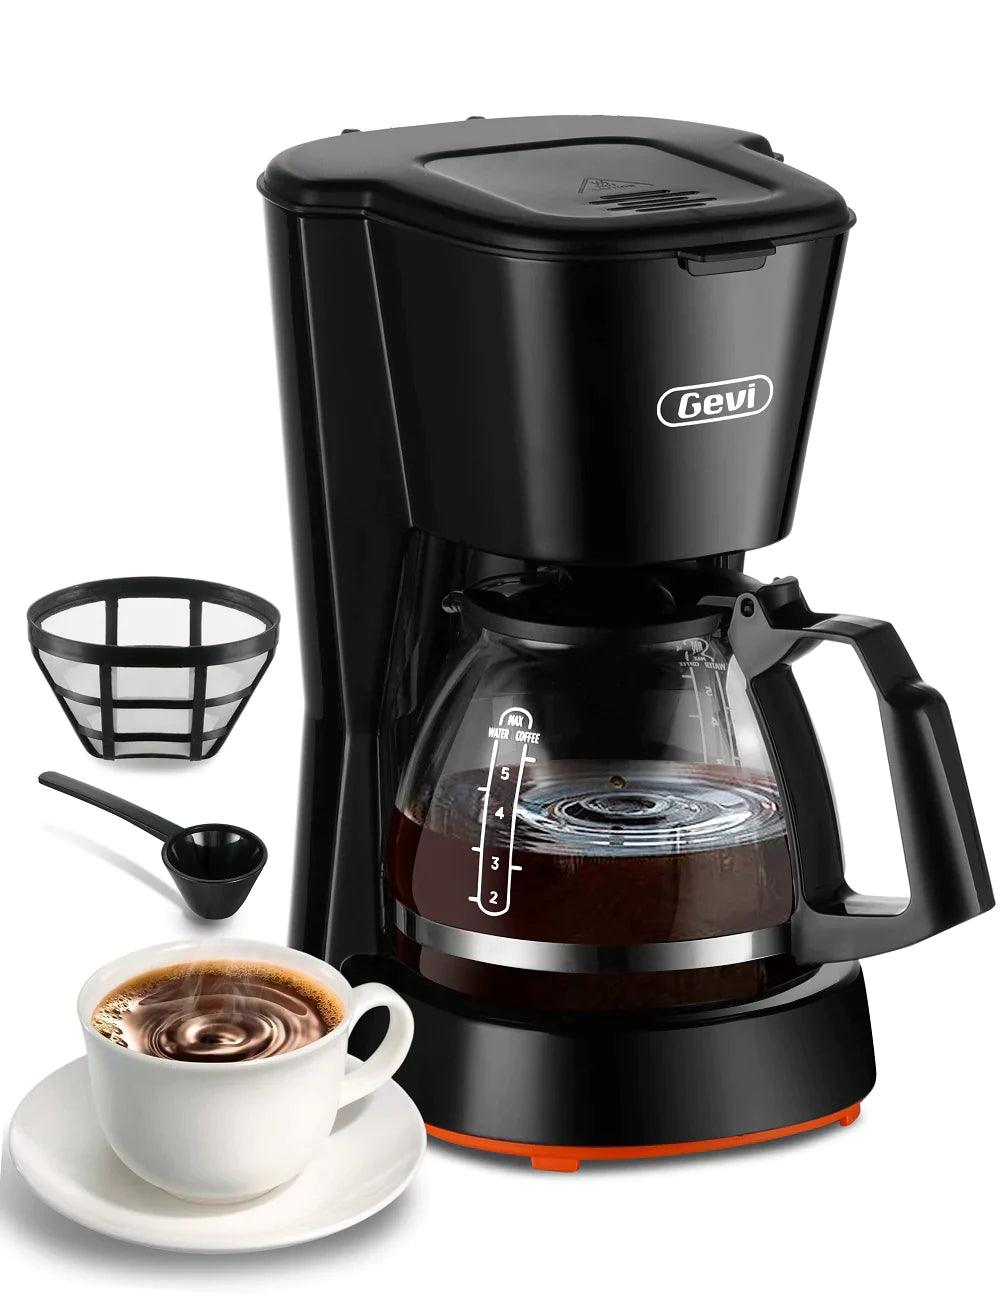 Gevi 4-in-1 Smart Pour-Over Coffee Machine Fast Heating Brewer with Built-in Grinder, 51 Step Grind Setting,Automatic Barista Mode, Custom Recipes